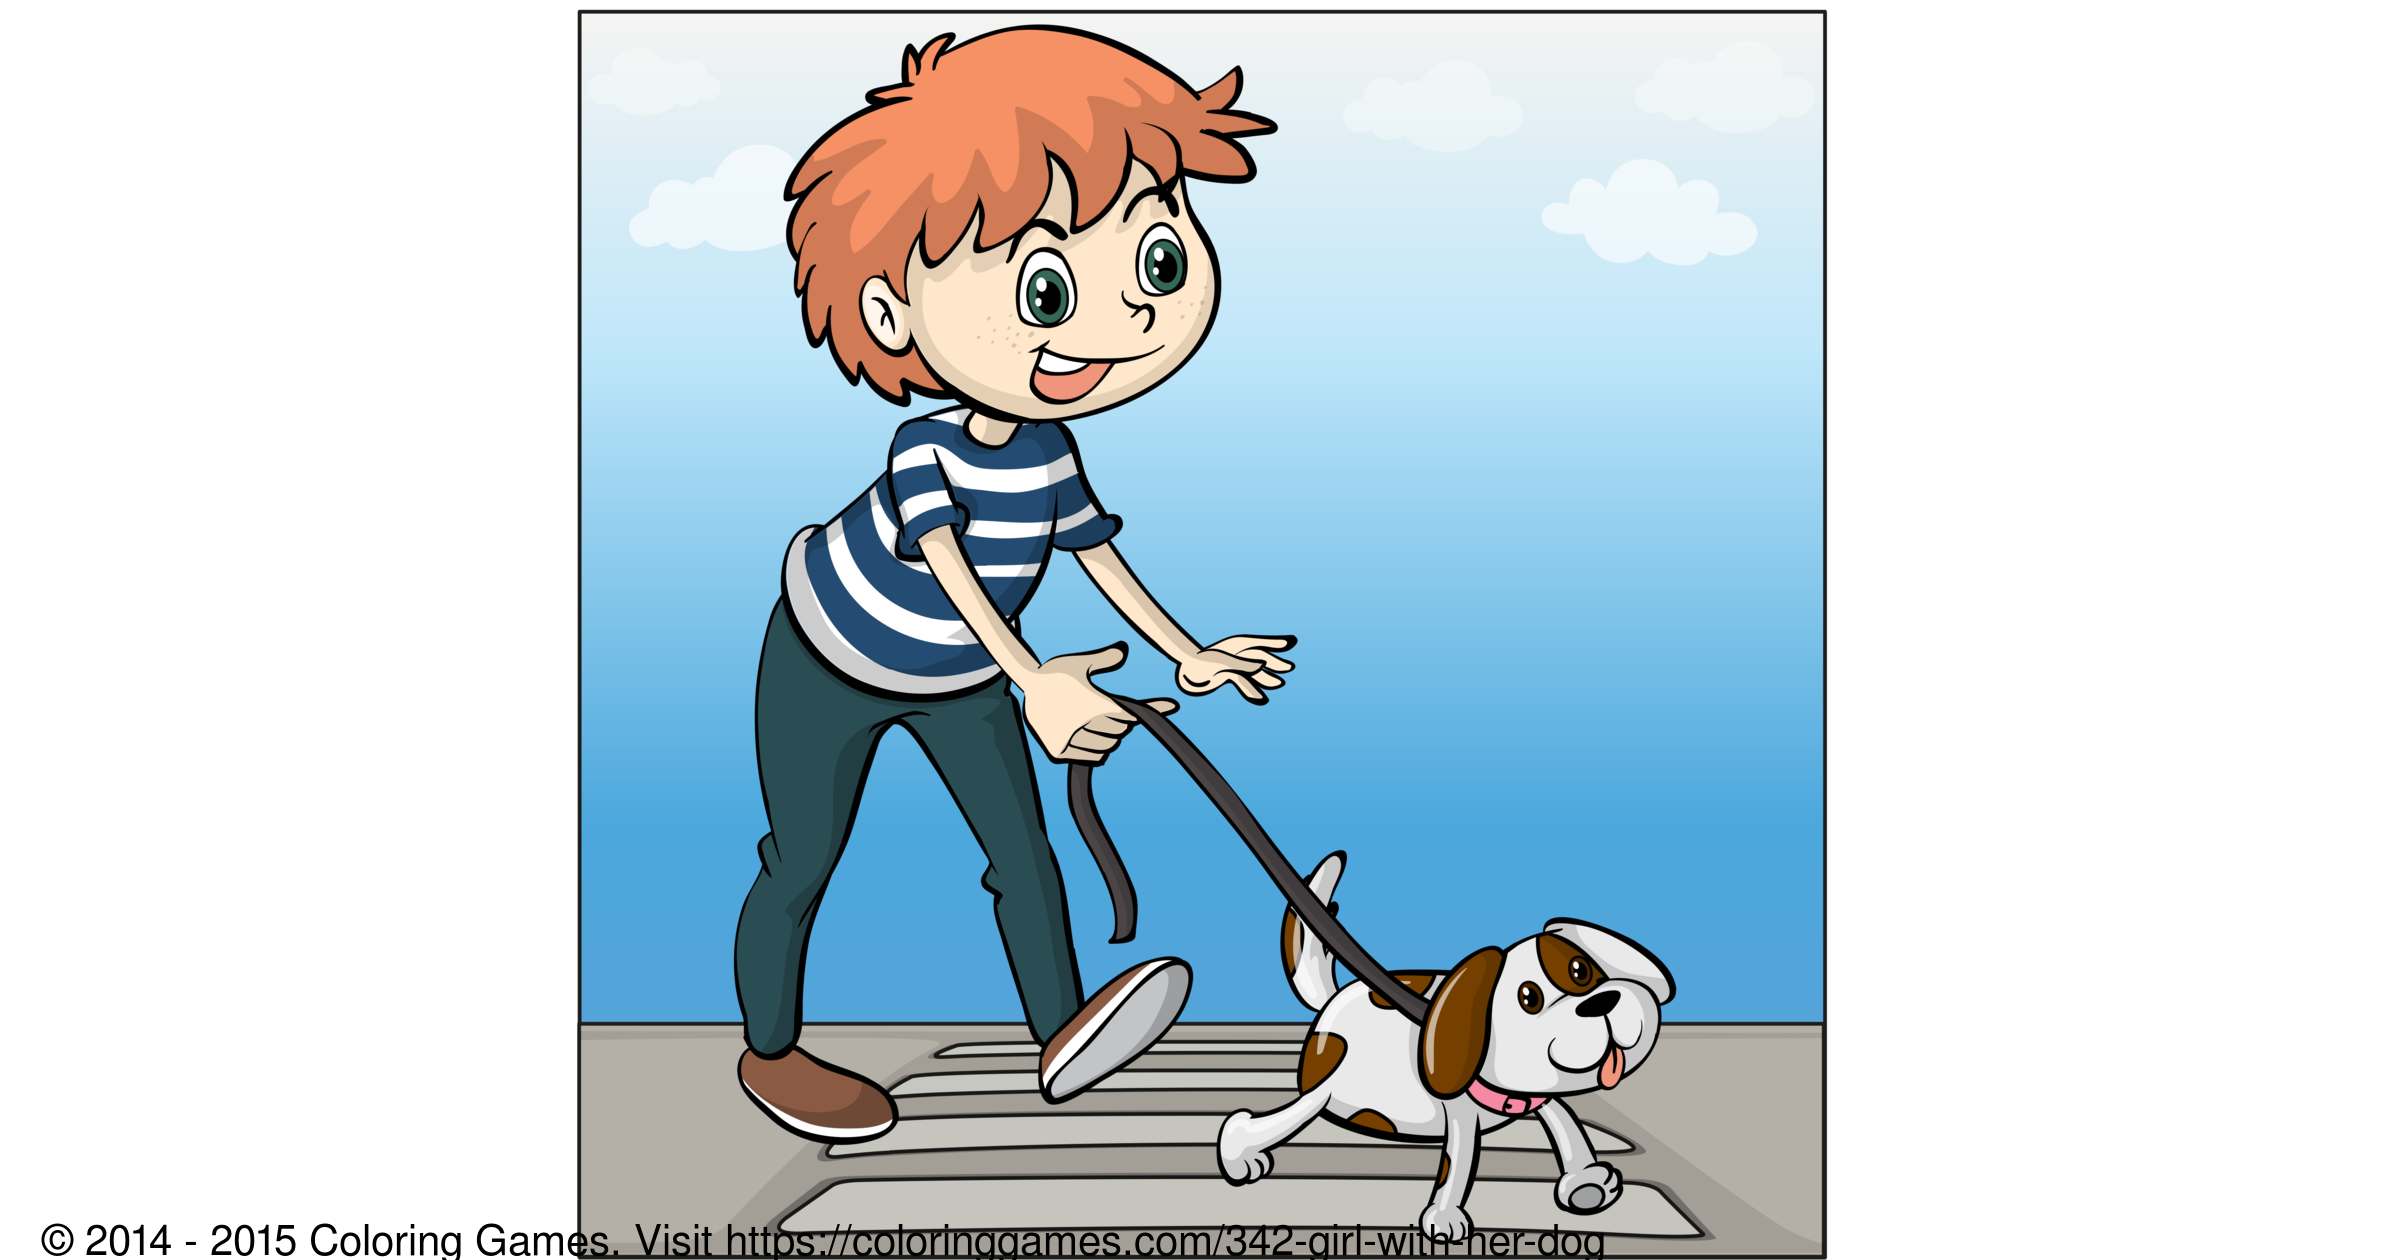 Girl with her dog - Coloring Games and Coloring Pages